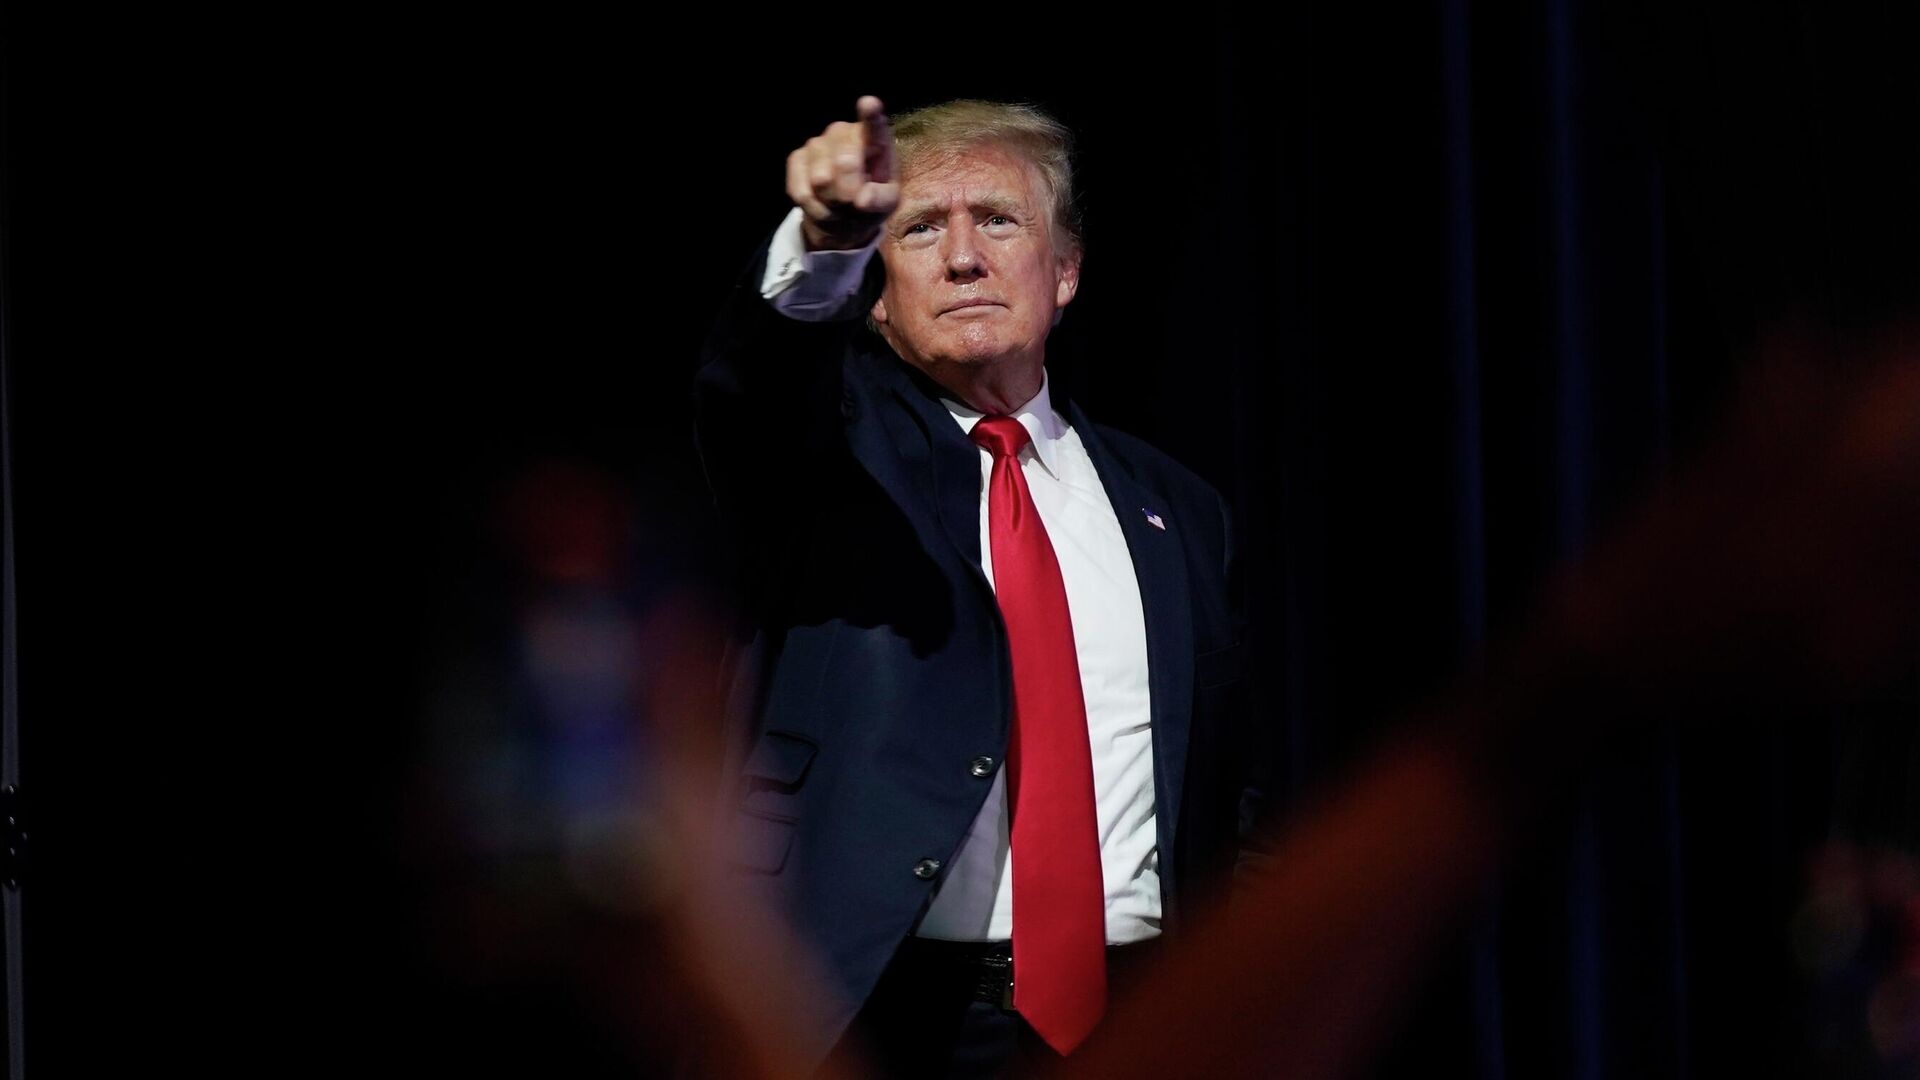 FILE - In this July 24, 2021, file photo, former President Donald Trump points to supporters after speaking at a Turning Point Action gathering, in Phoenix - Sputnik International, 1920, 14.04.2022